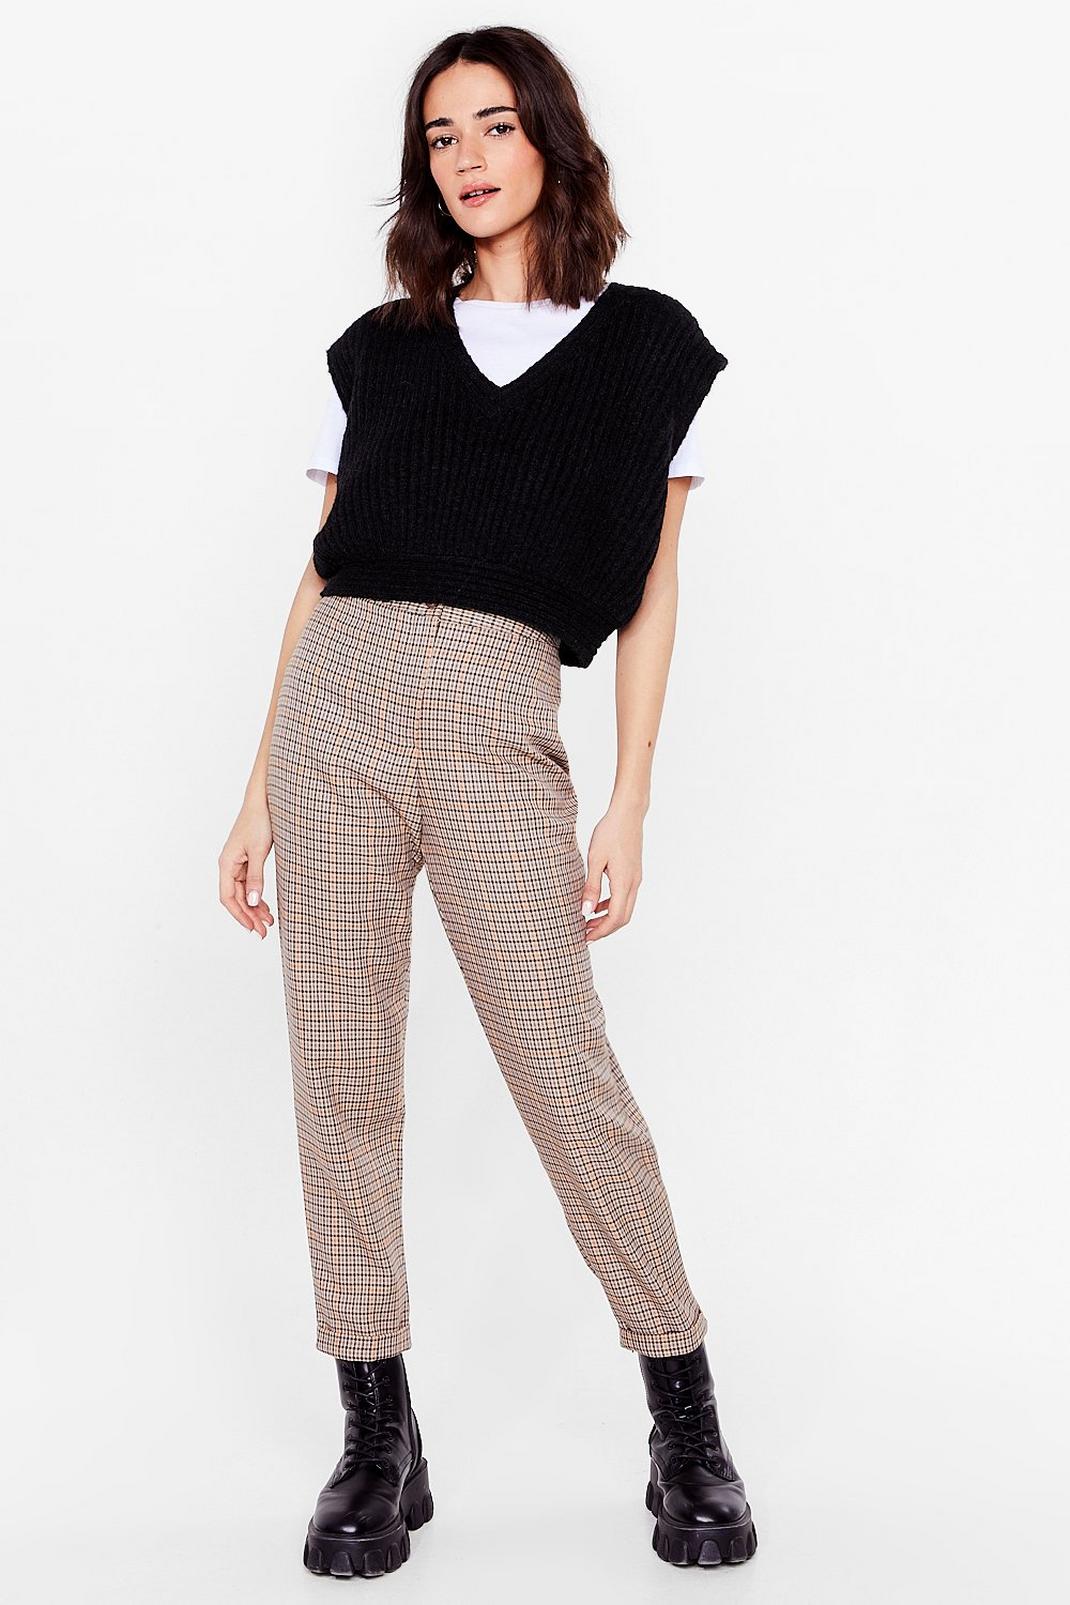 Beige All Checks Are Off Petite High-Waisted Pants image number 1